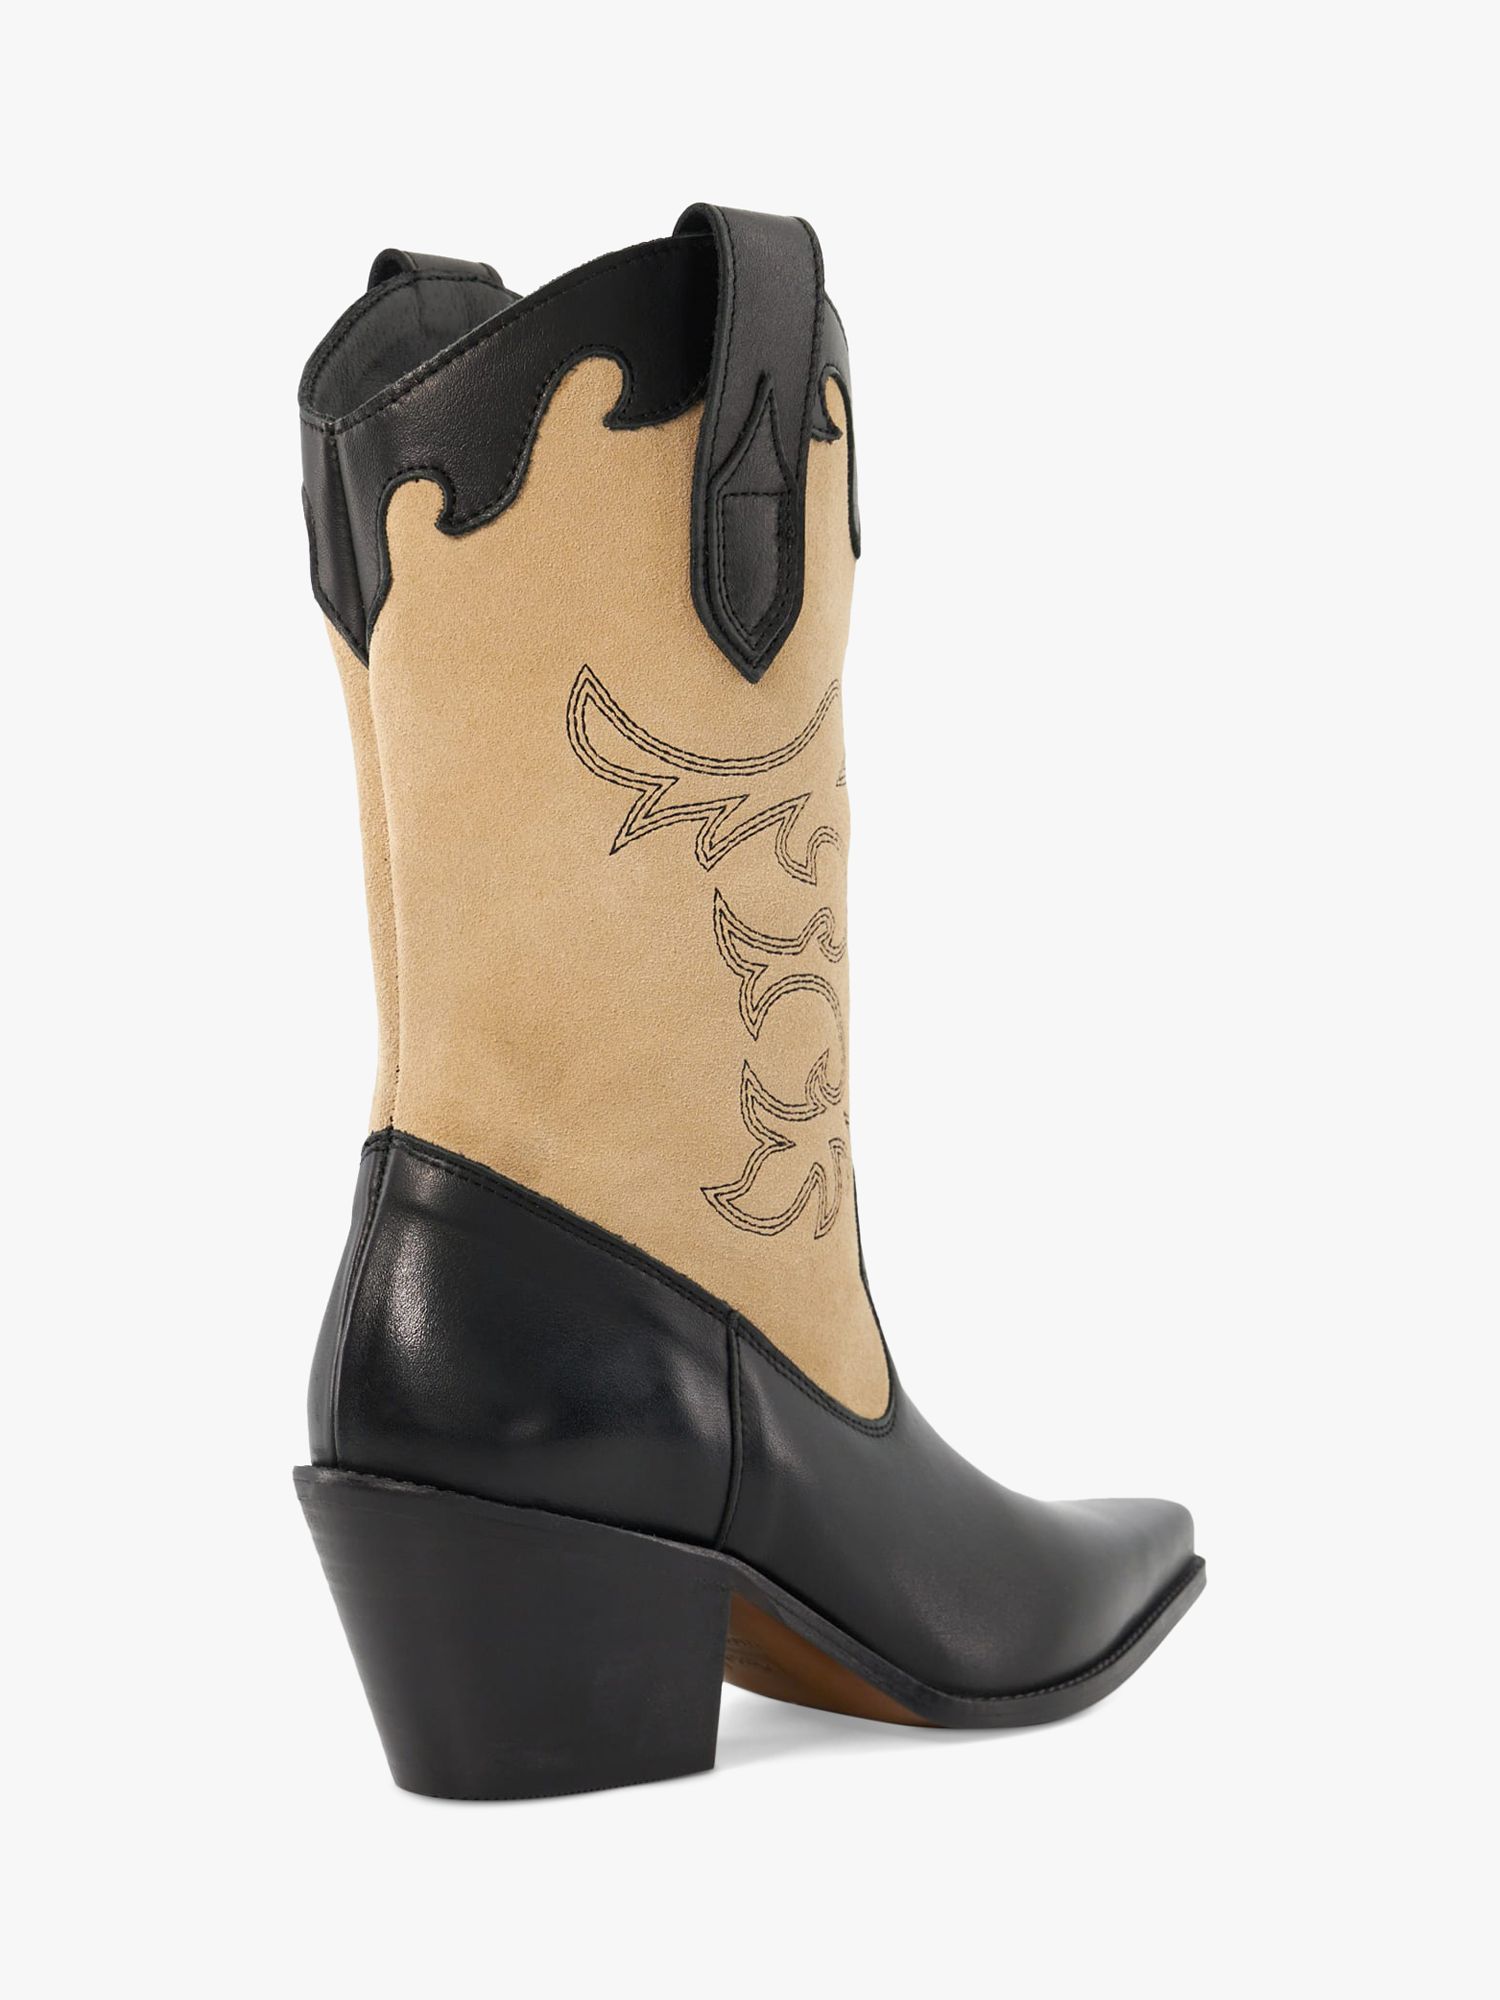 Buy Dune Prickly Leather Cowboy Boots Online at johnlewis.com